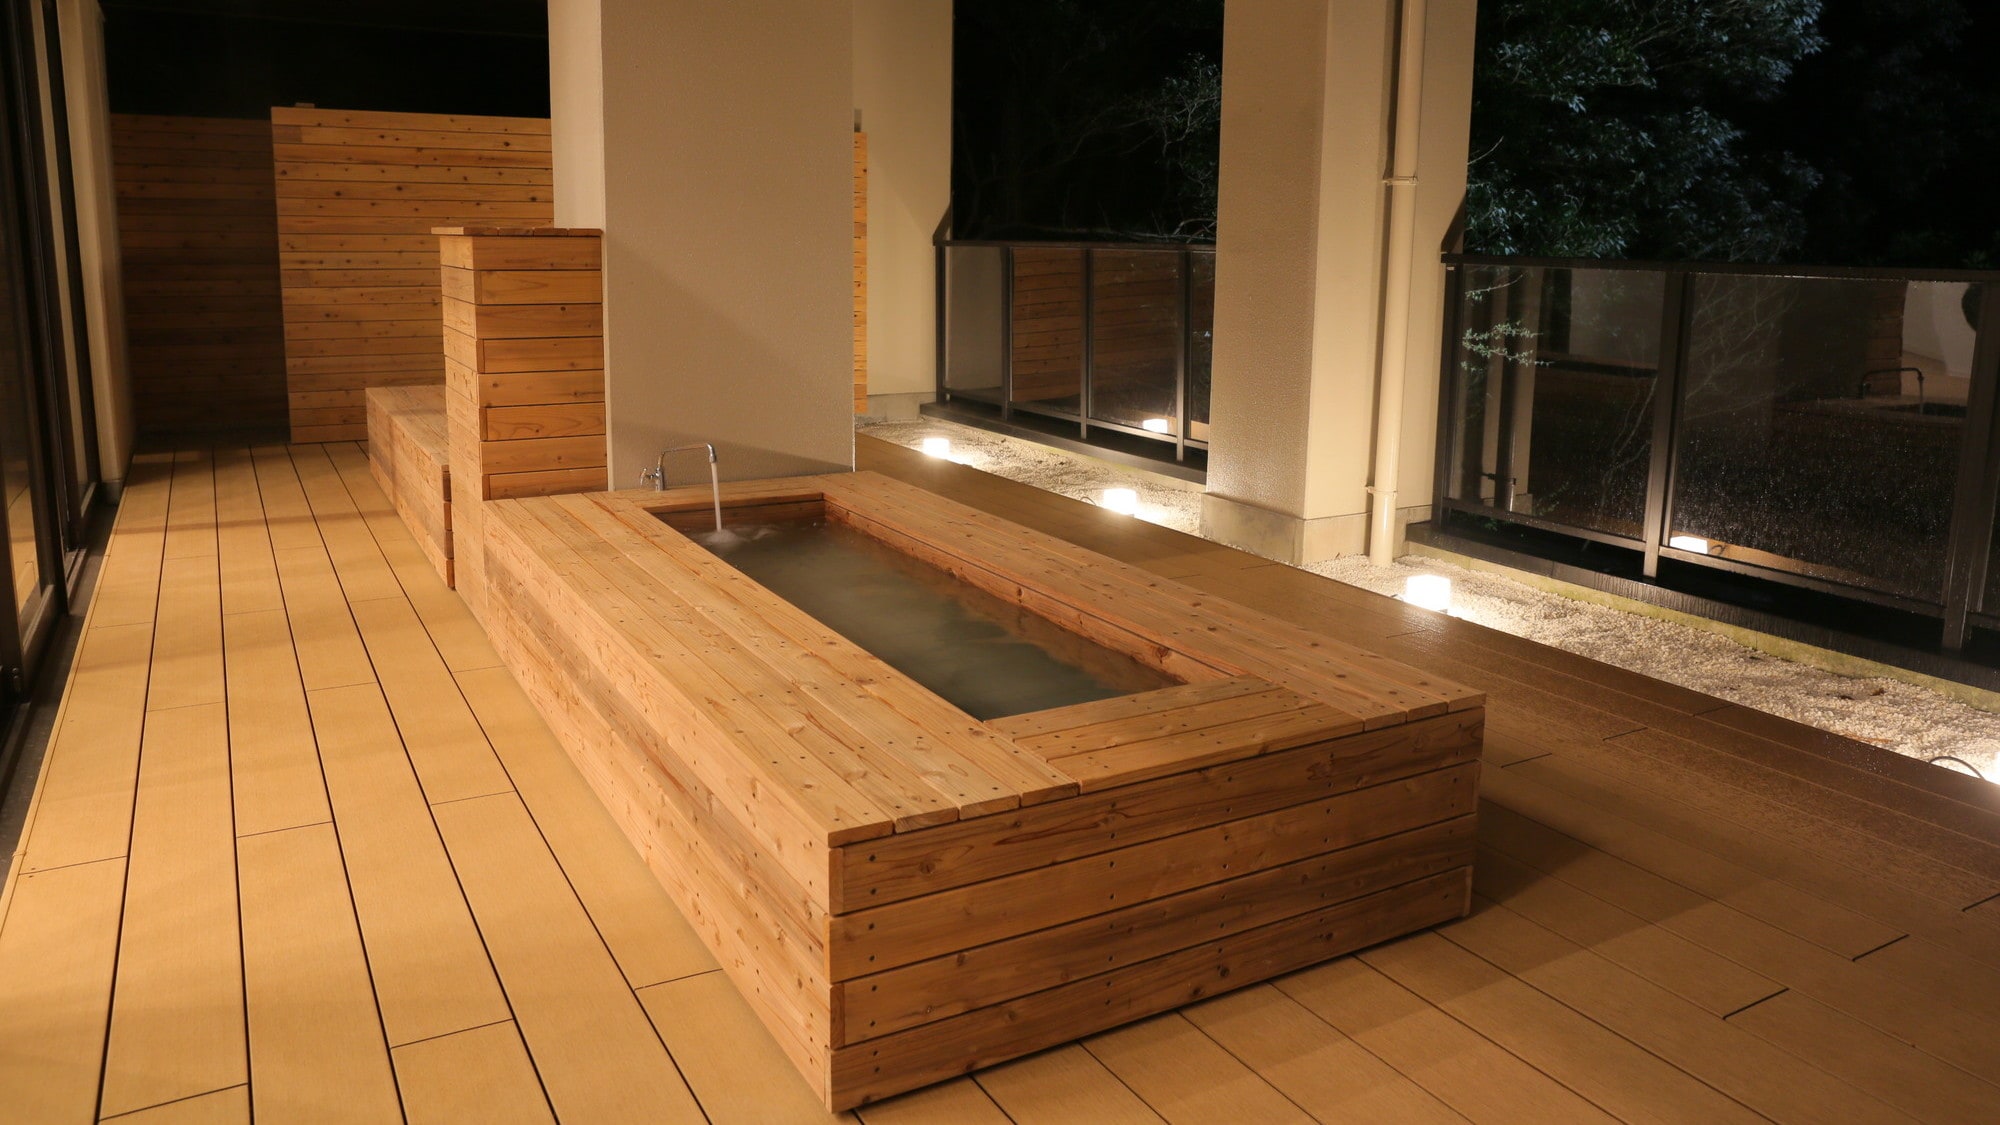 A hot spring terrace that you can easily use